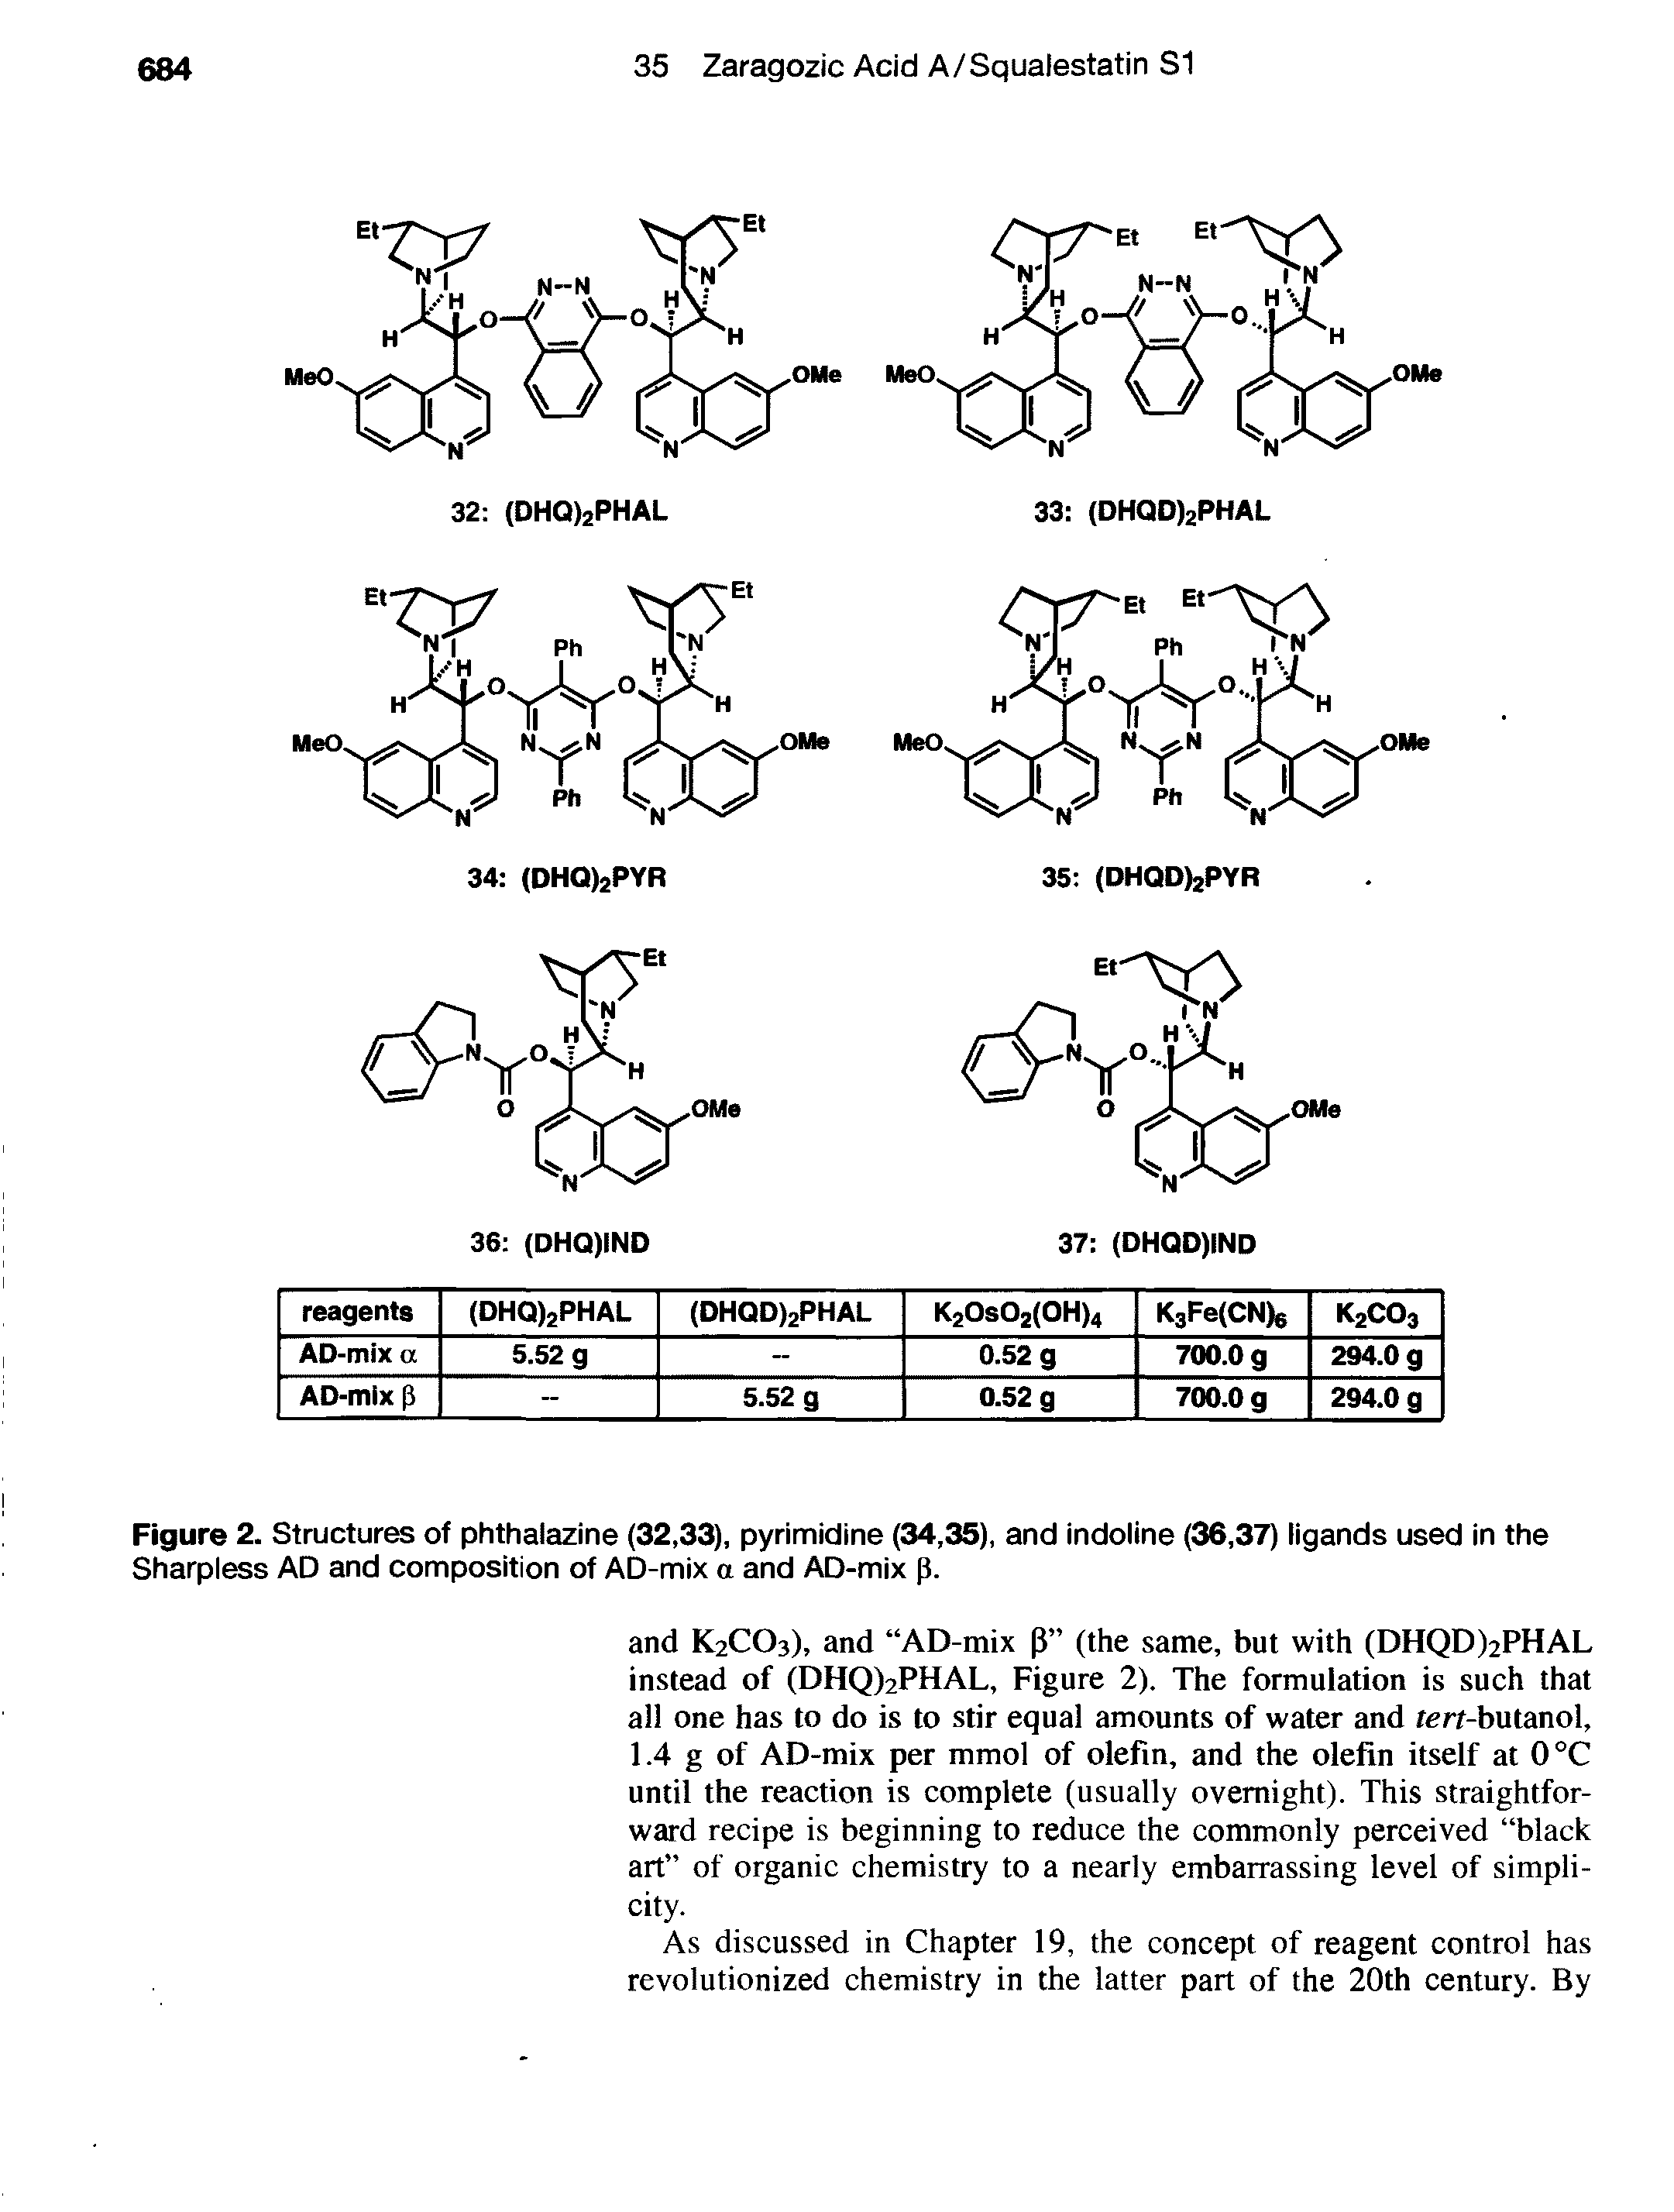 Figure 2. Structures of phthalazine (32,33), pyrimidine (34,35), and indoline (36,37) ligands used in the Sharpless AD and composition of AD-mix a and AD-mix p.